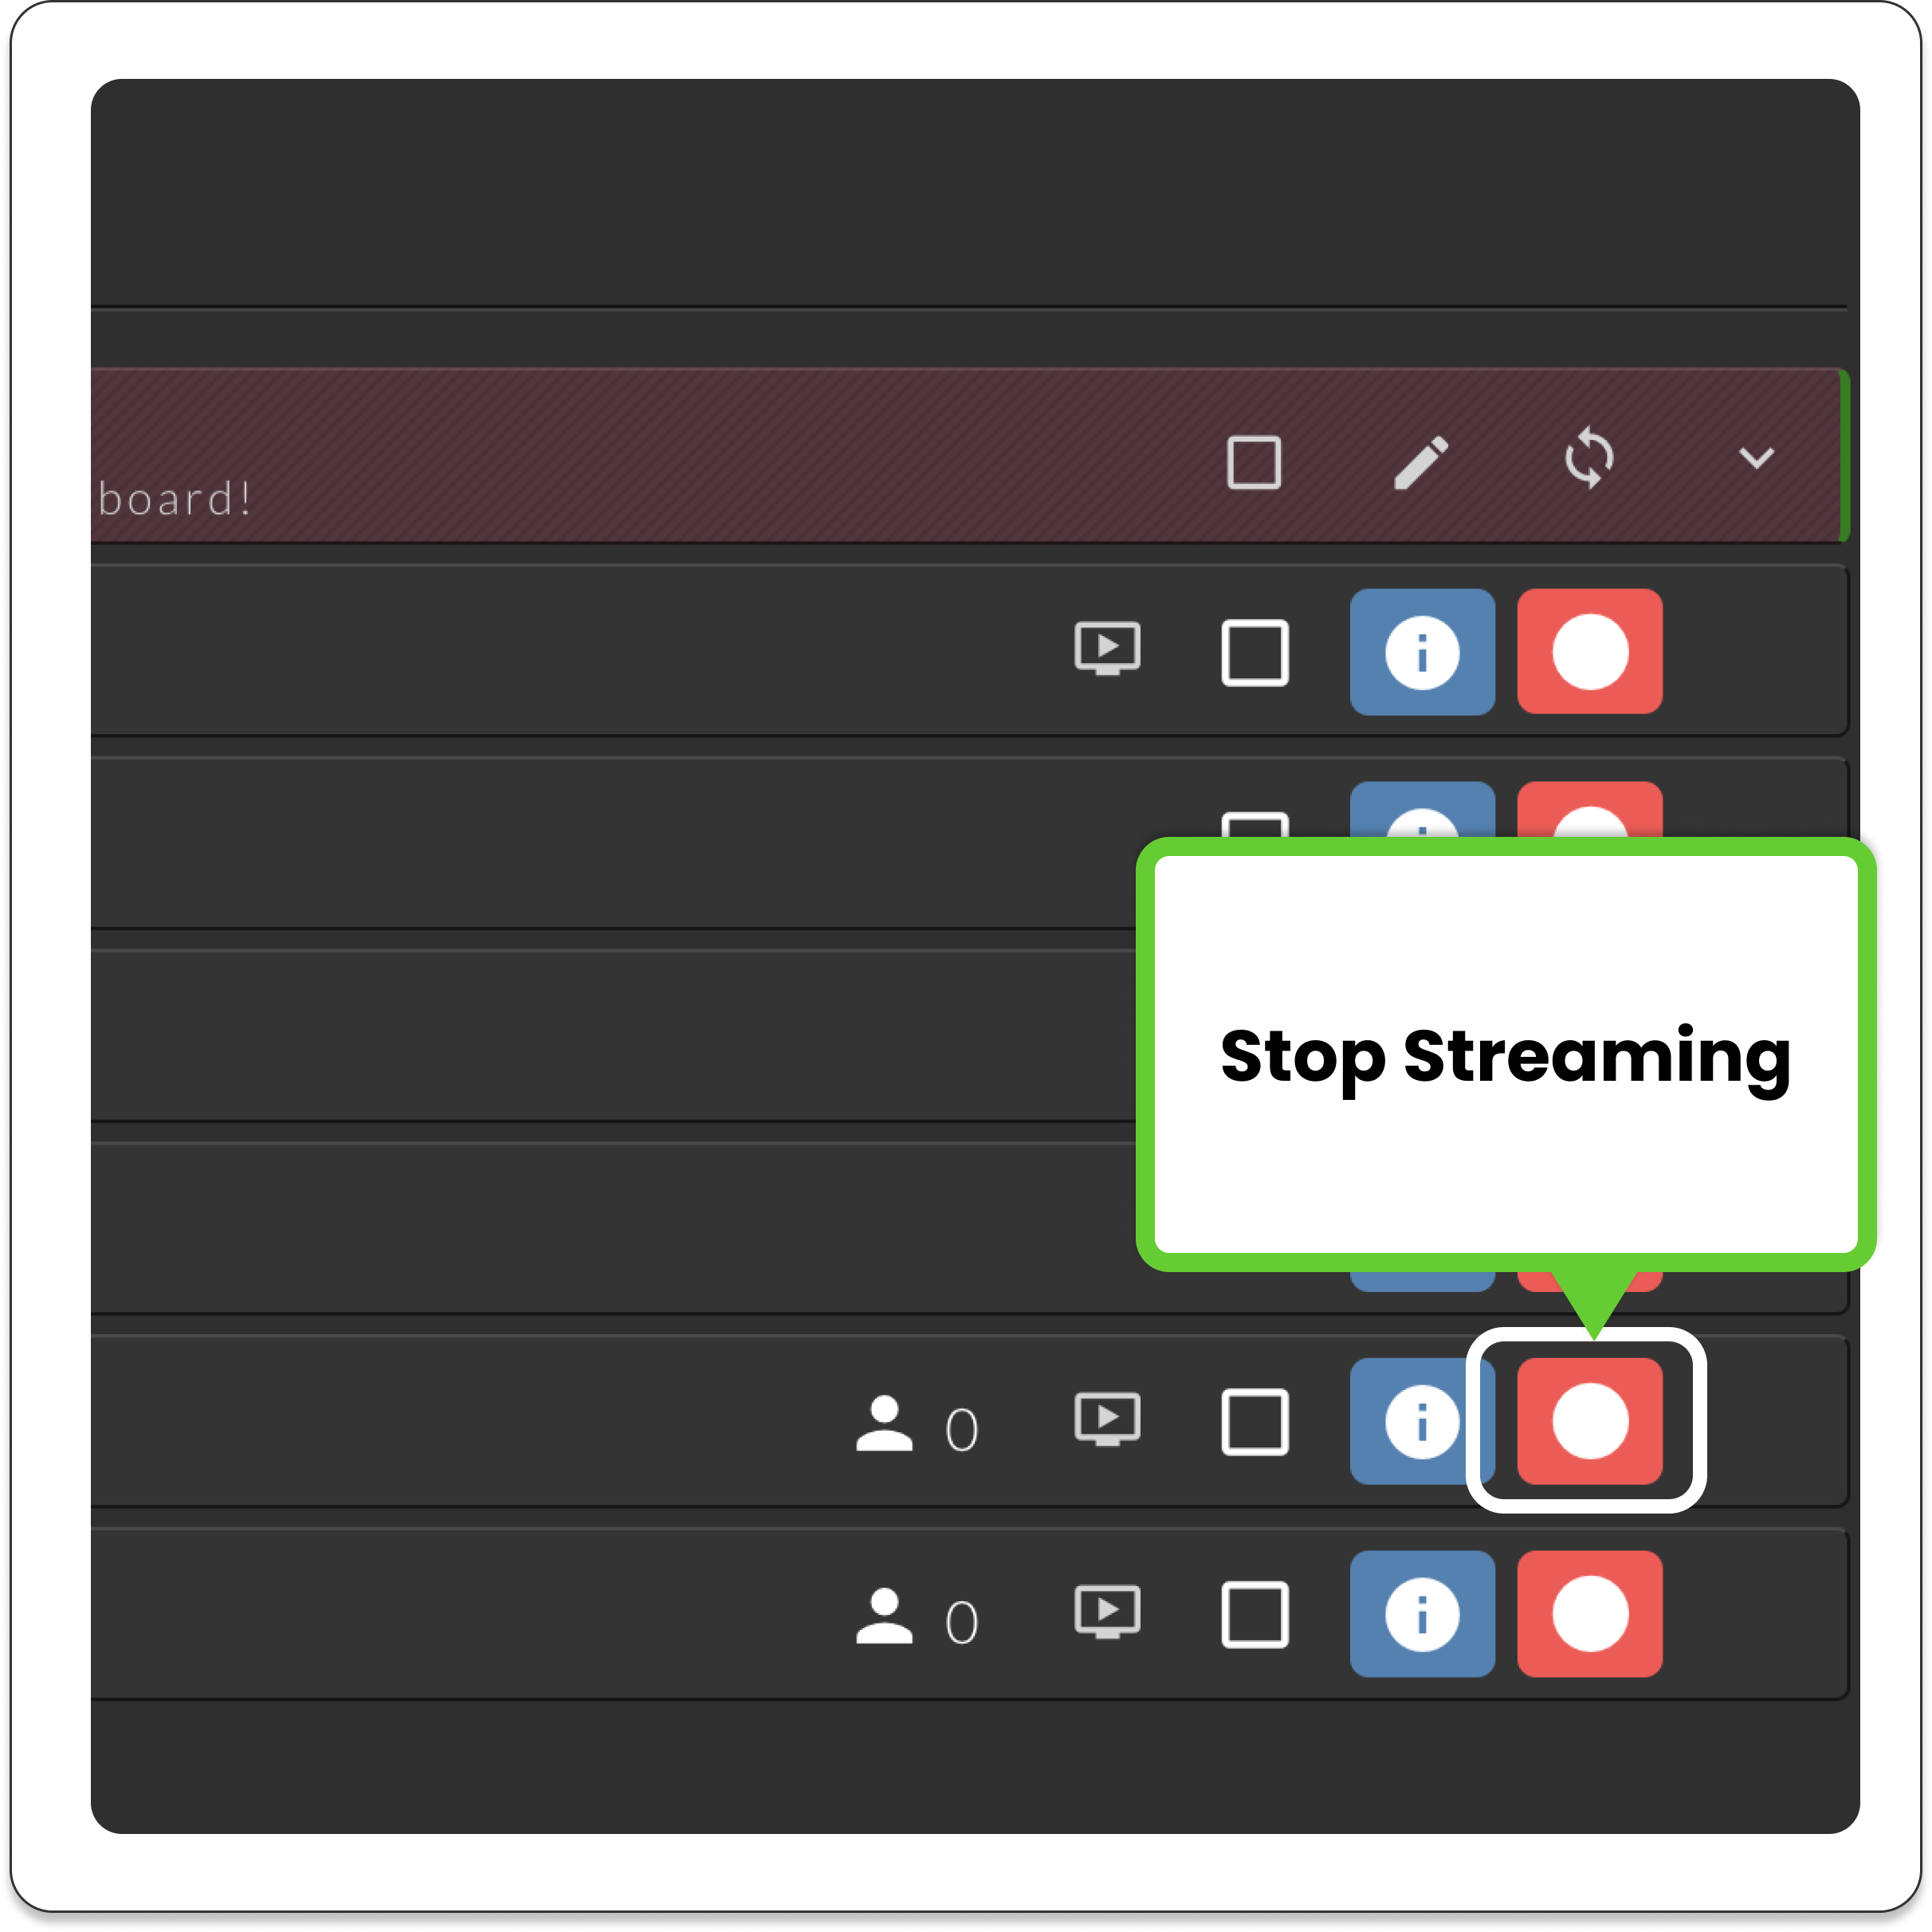 switchboardlive_workflow-page_destinations_pane_multistreaming_live_stopstreaming_button.png